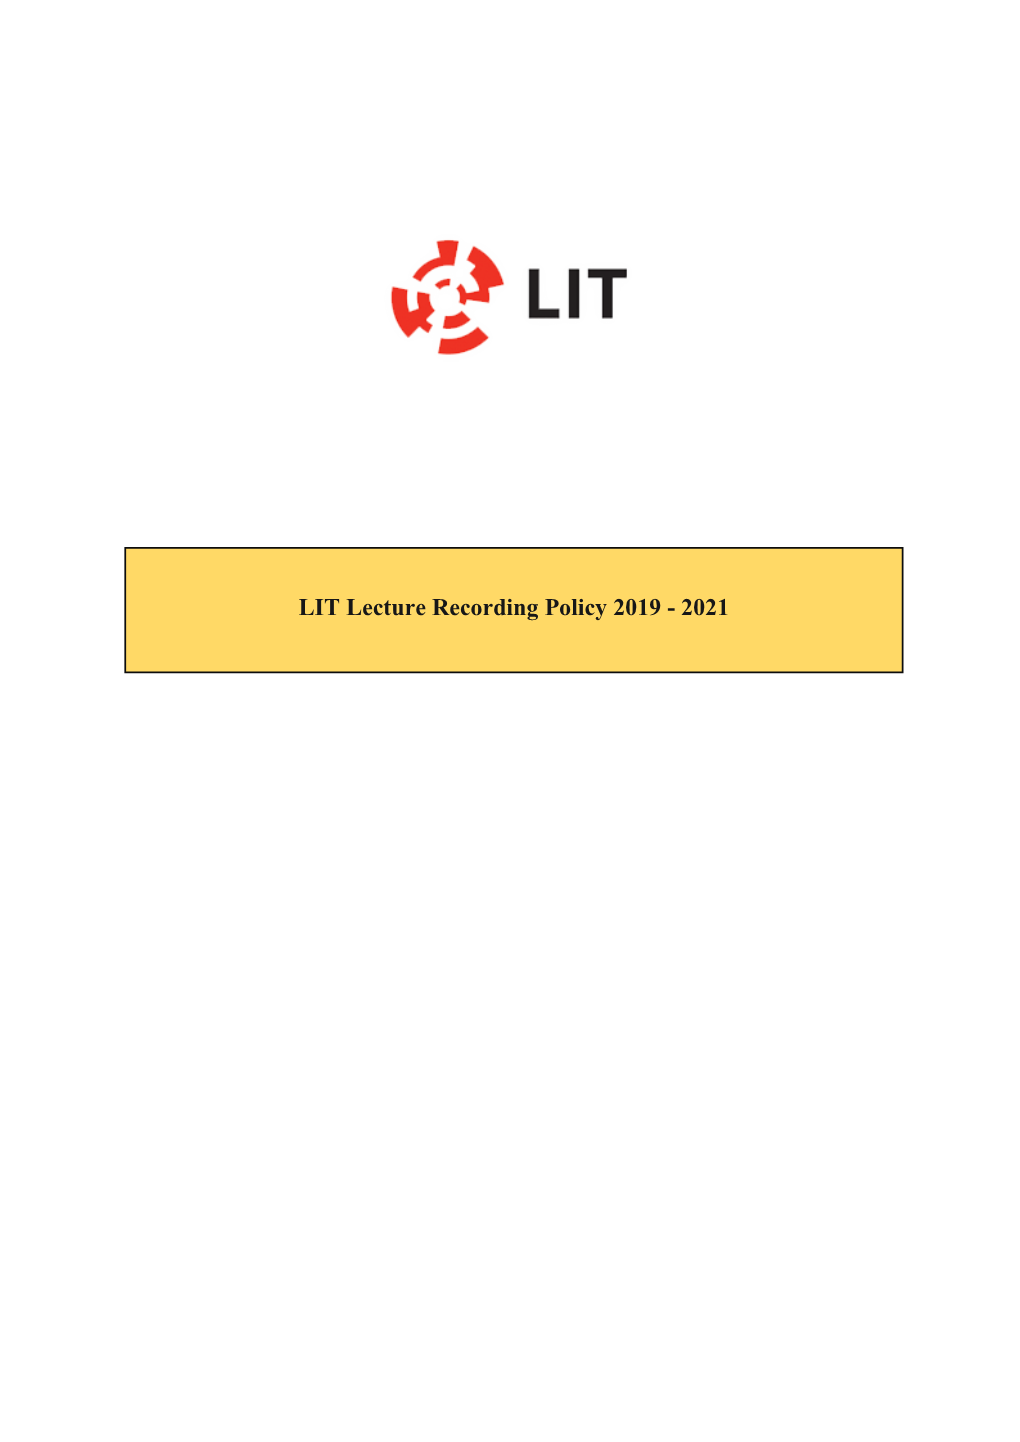 LIT Lecture Recording Policy 2019 - 2021 Document Control Record